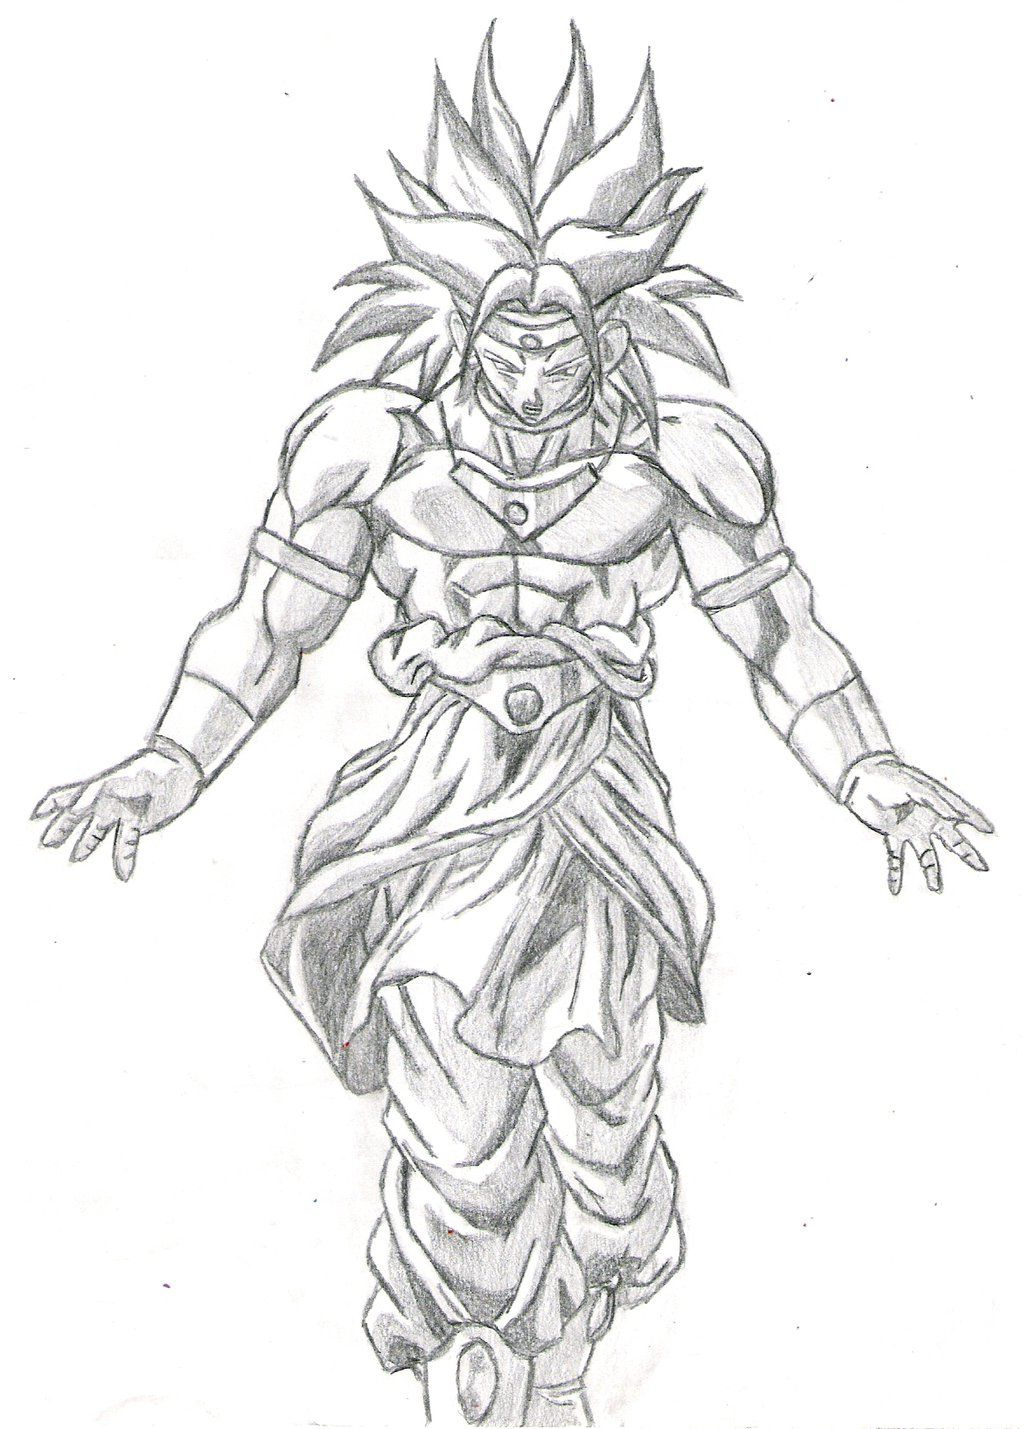 Dessin Broly Cool Photos Broly Drawings Dbz